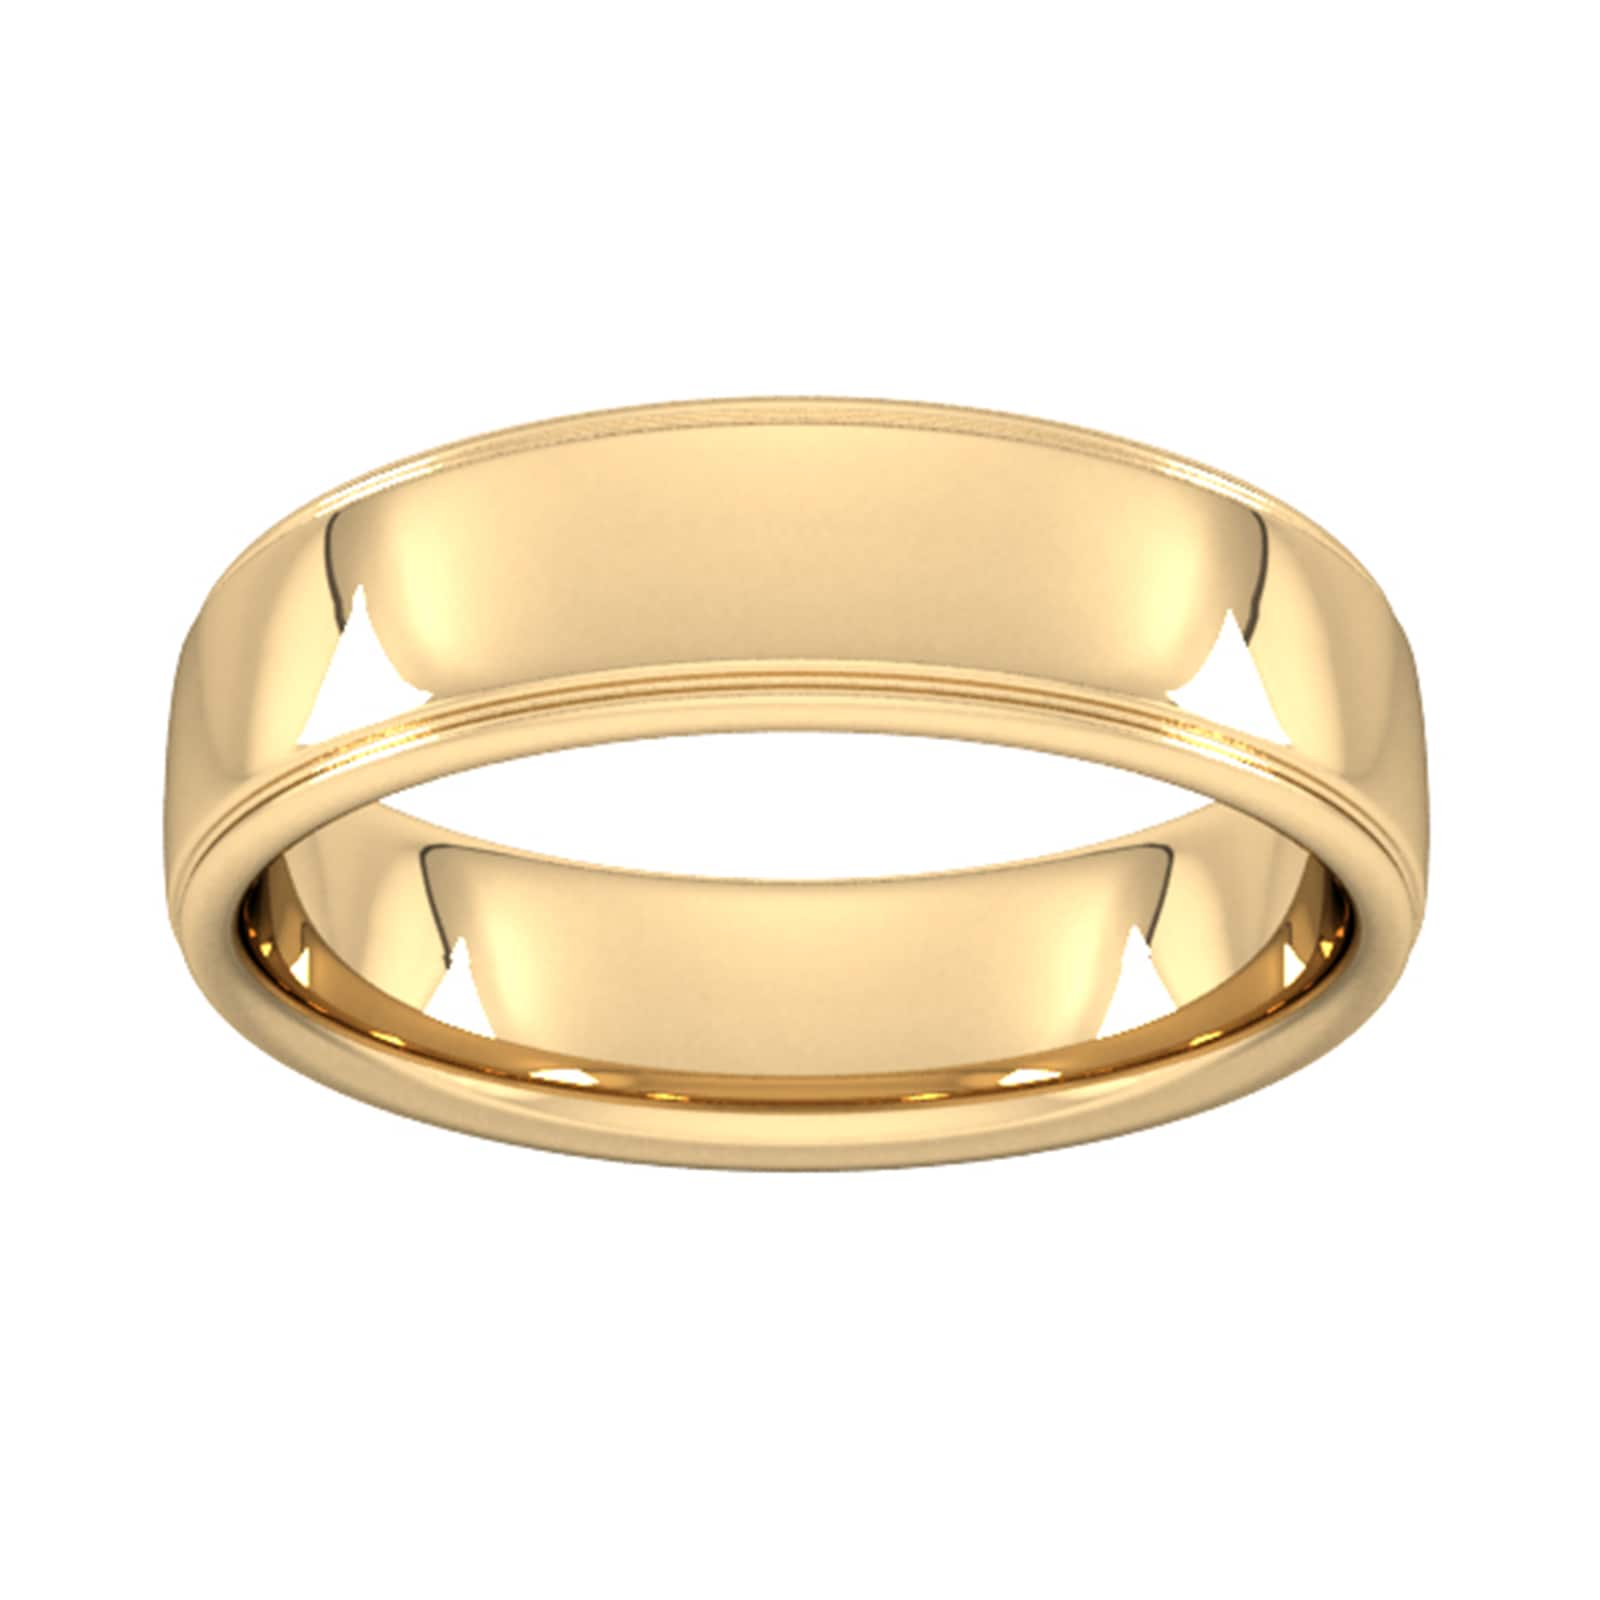 6mm Slight Court Heavy Polished Finish With Grooves Wedding Ring In 18 Carat Yellow Gold - Ring Size H